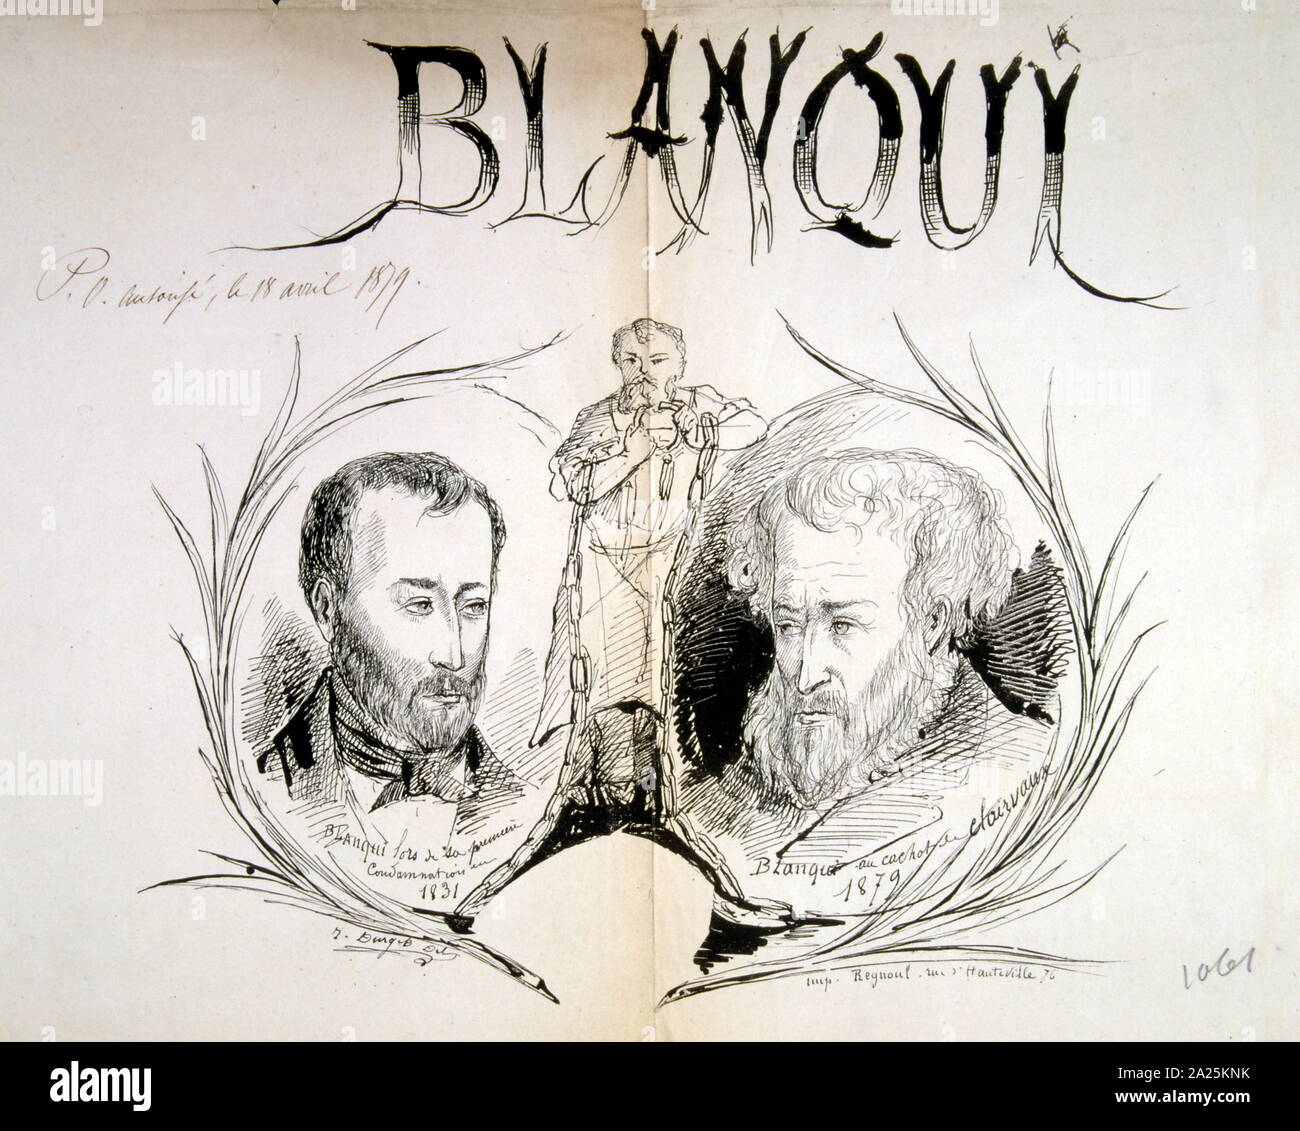 Illustrations depicting the life of Louis Auguste Blanqui (1805 -1881); French socialist and political activist, notable for his revolutionary theory of Blanquism. Stock Photo